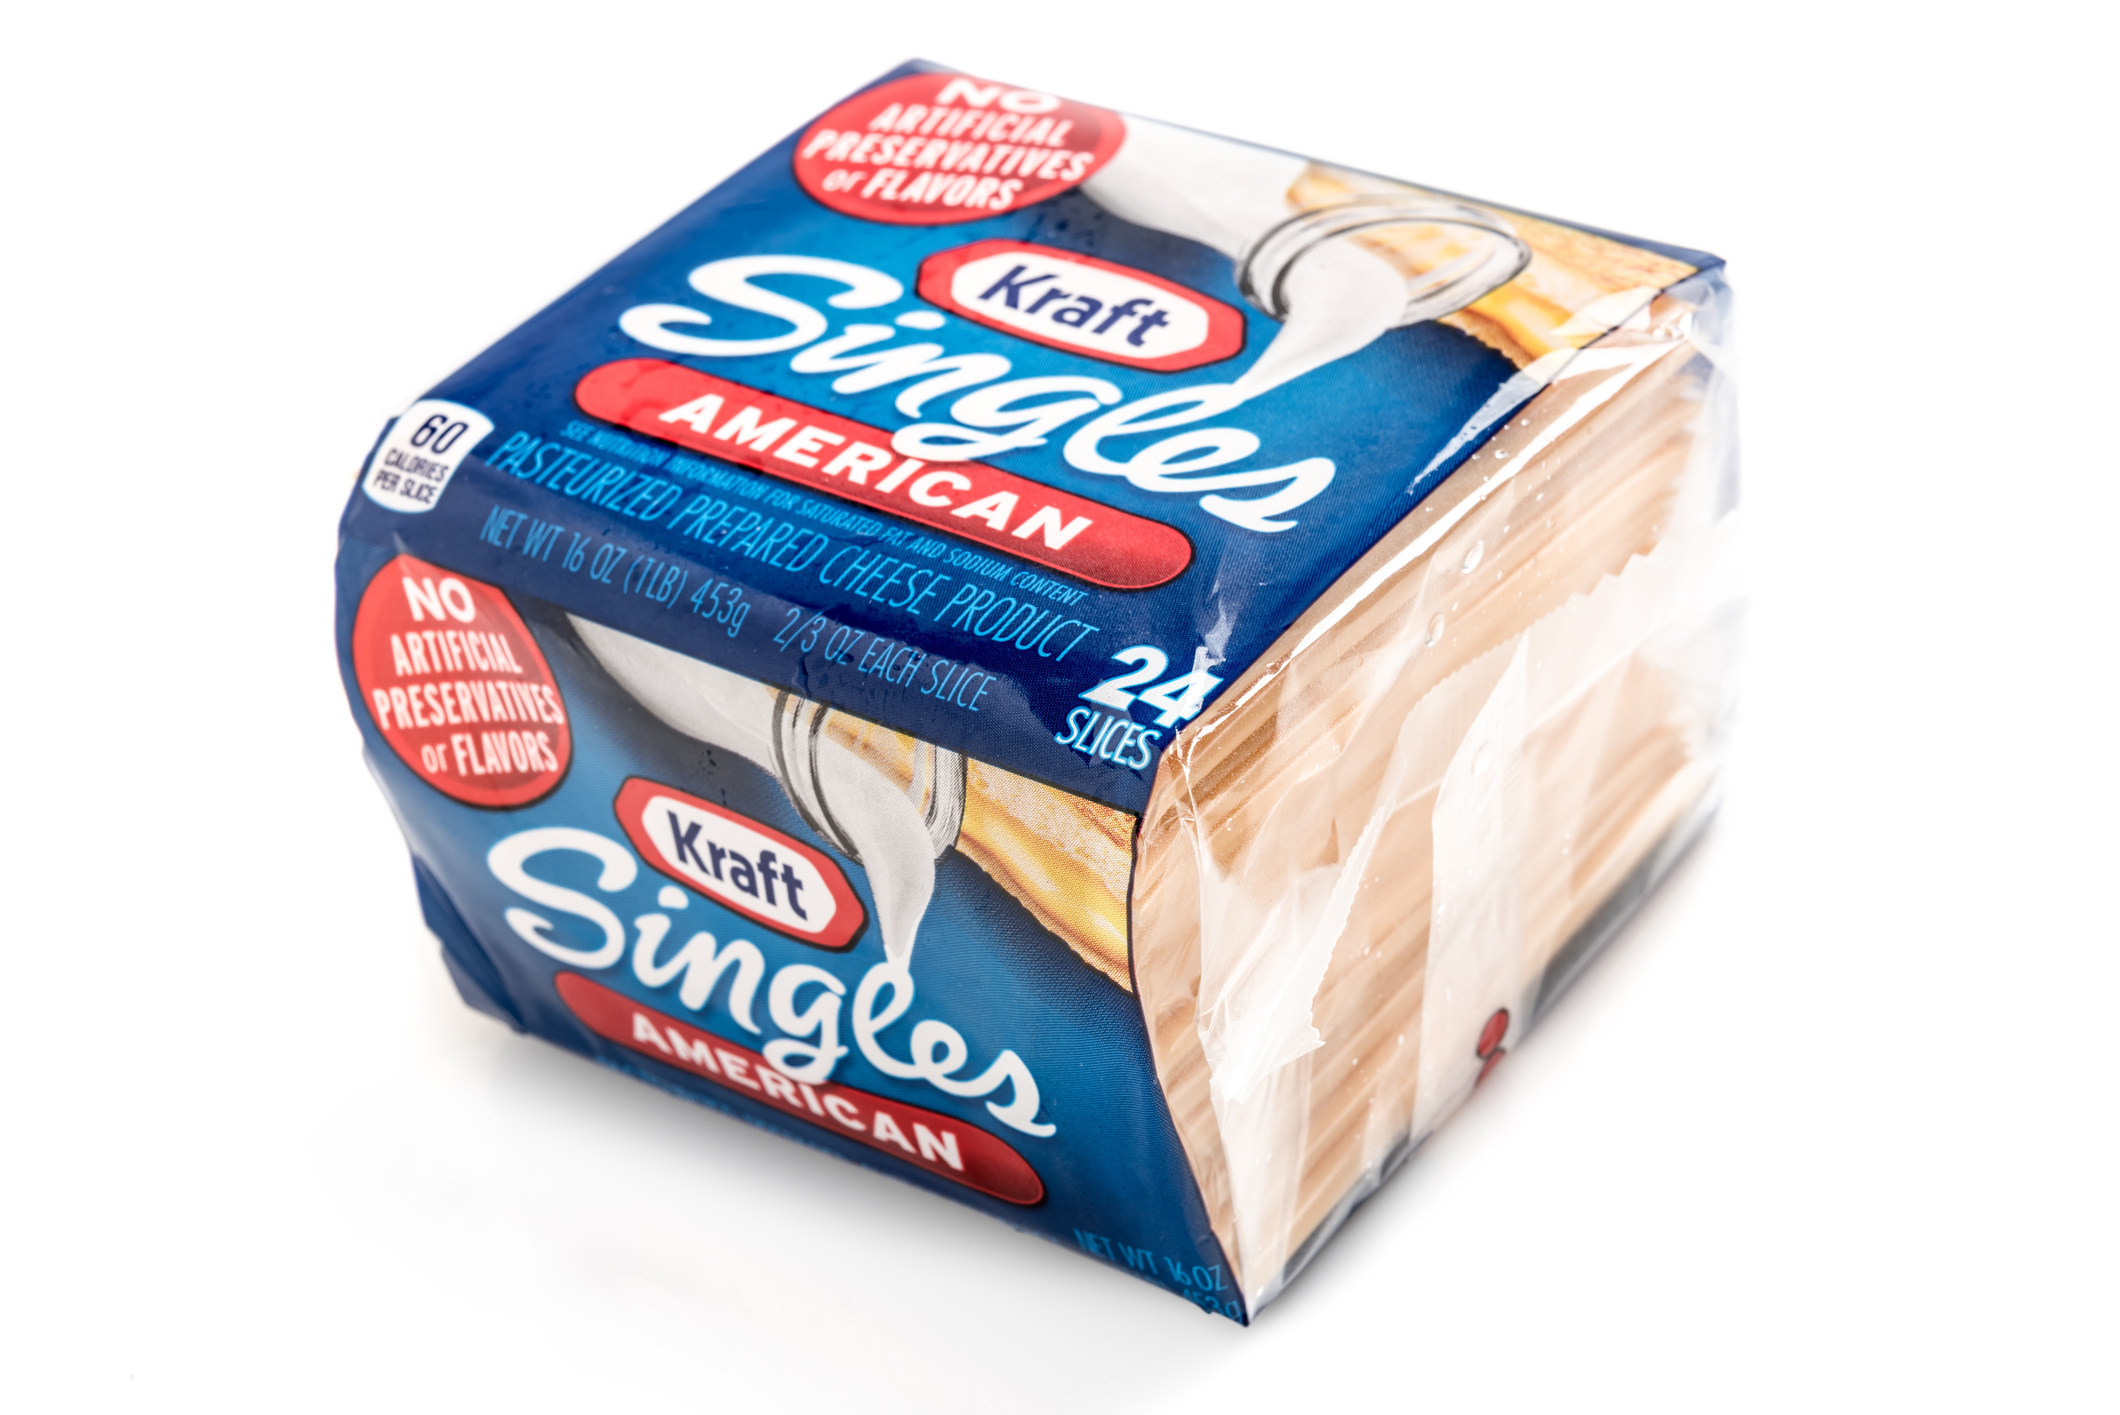 A stack of Kraft singles.